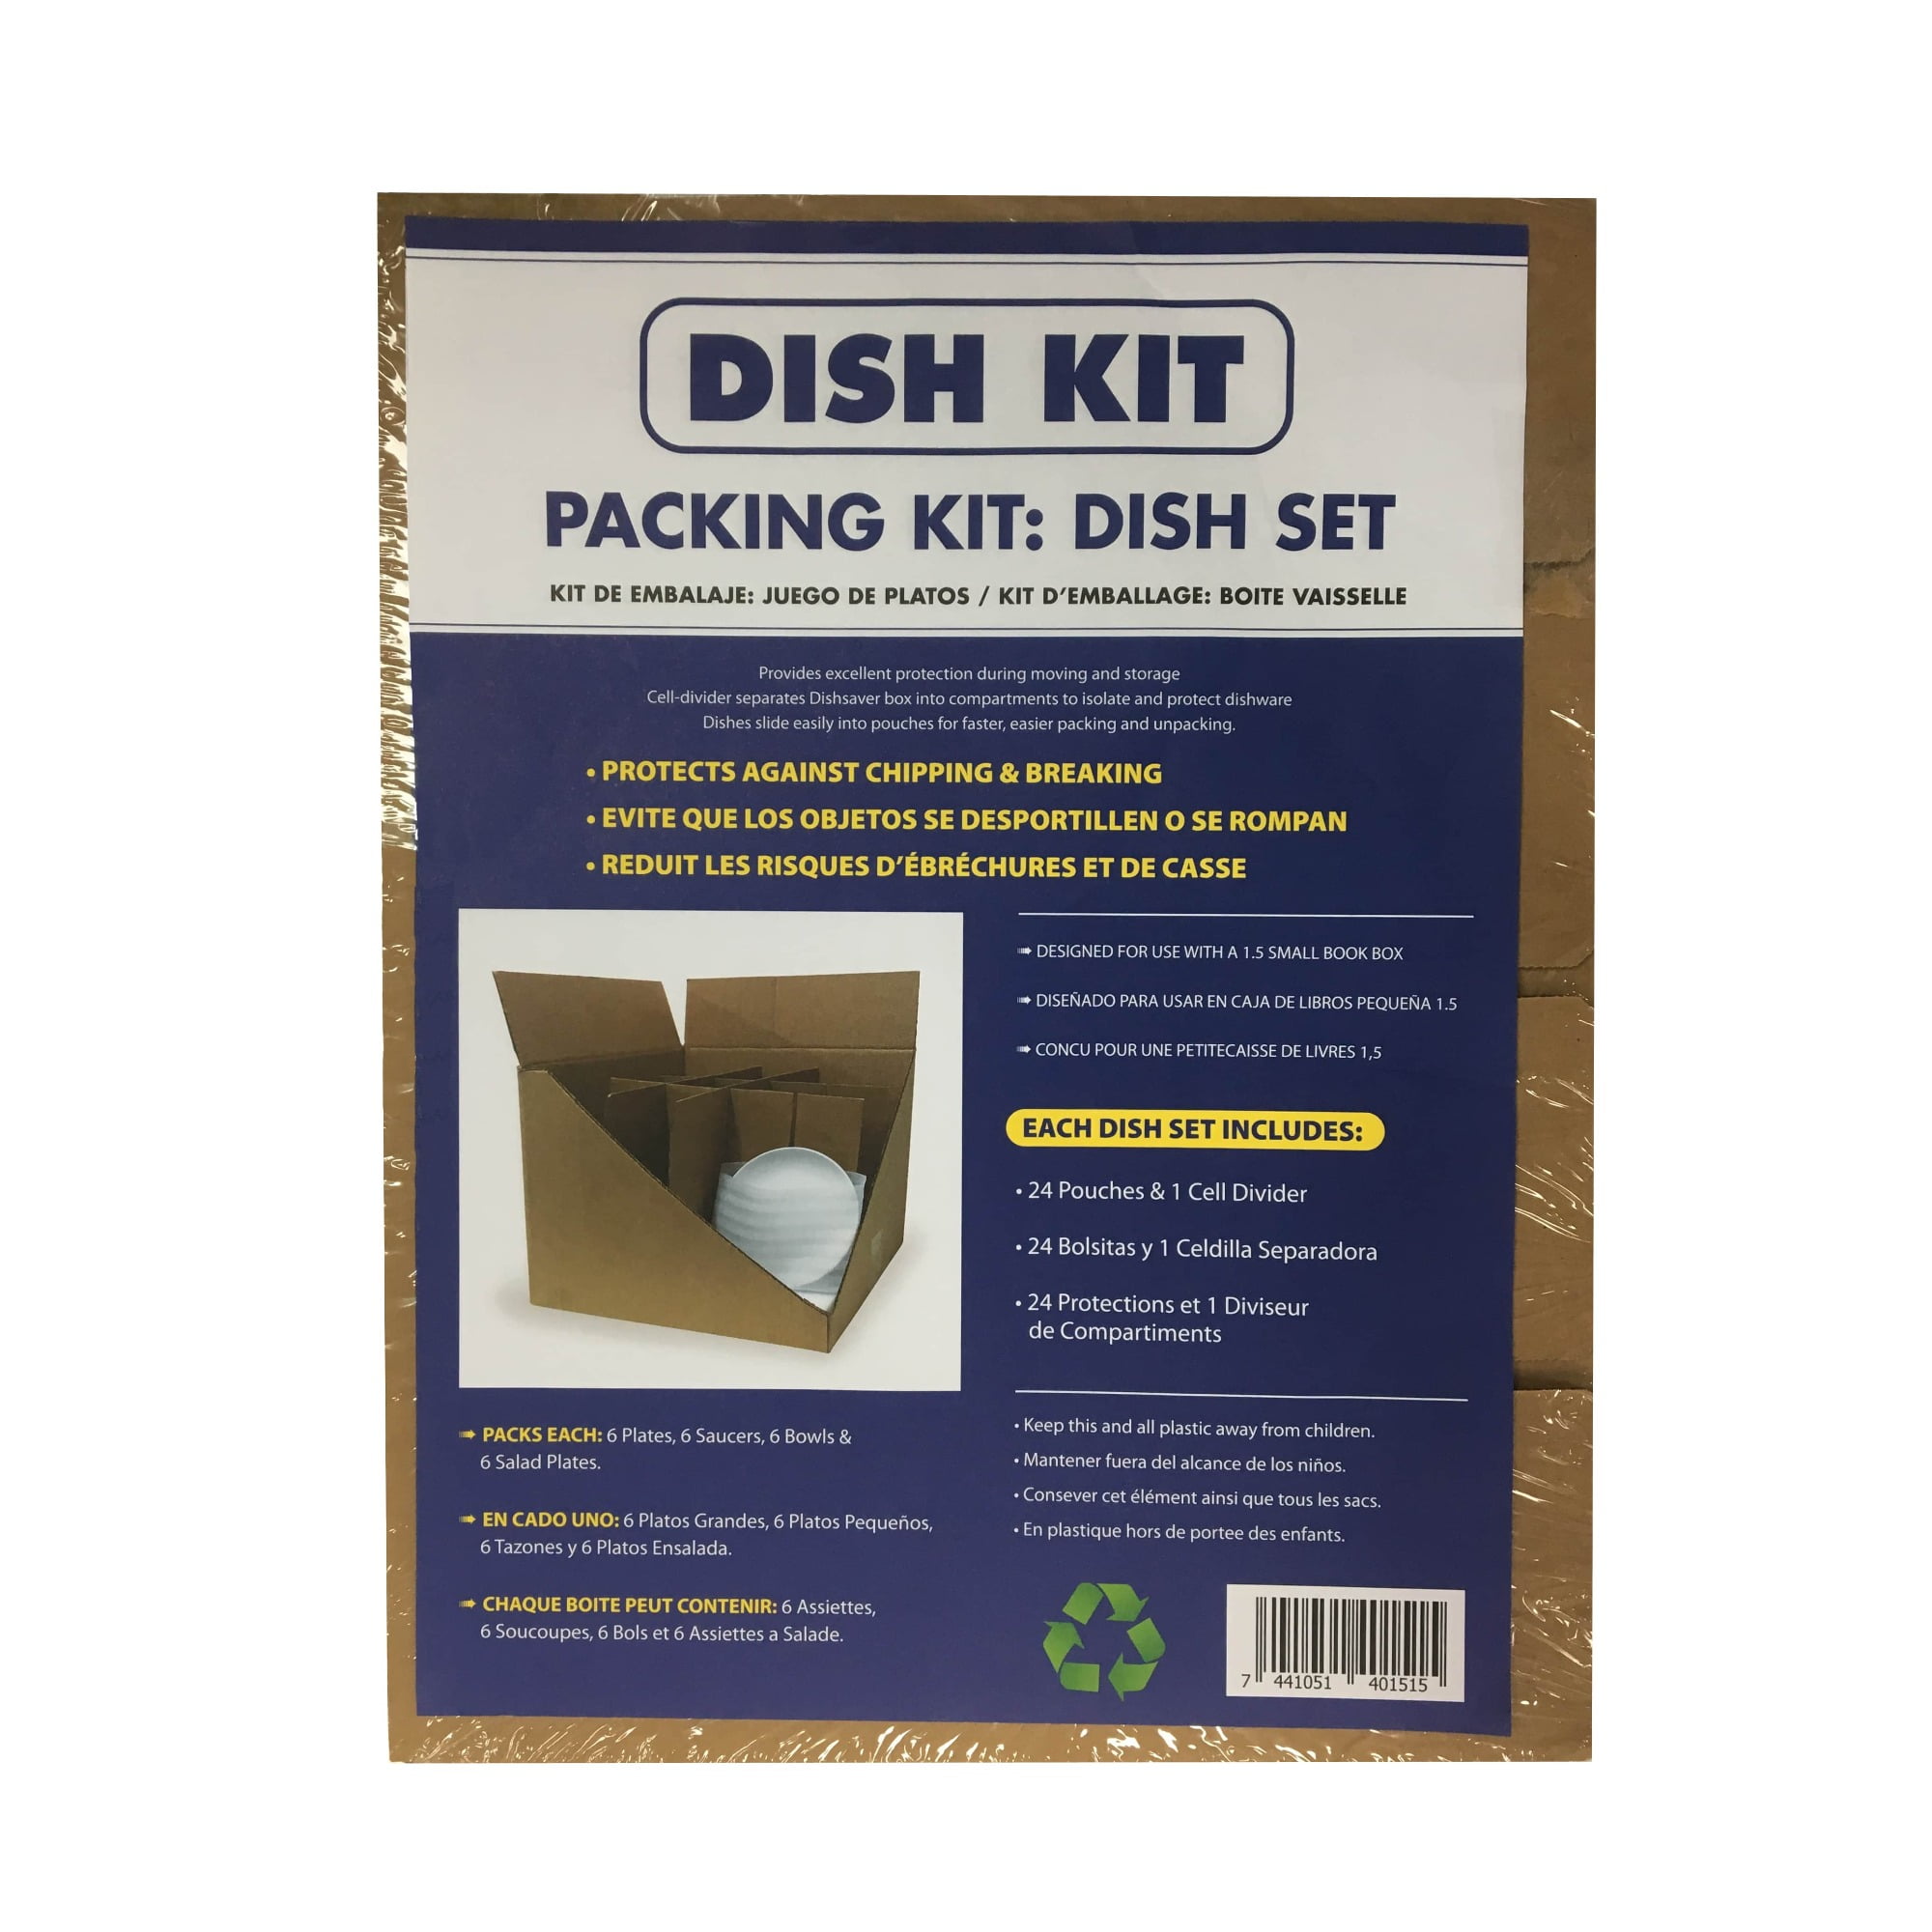 Protect Dishes Packaging Supplies for Valuables 1 Pack includes 30 Pouches. Cups and more UBOXES 11 7/8x 12 1/8 Foam Pouches for Fragile Items Glasses 30 Pack 